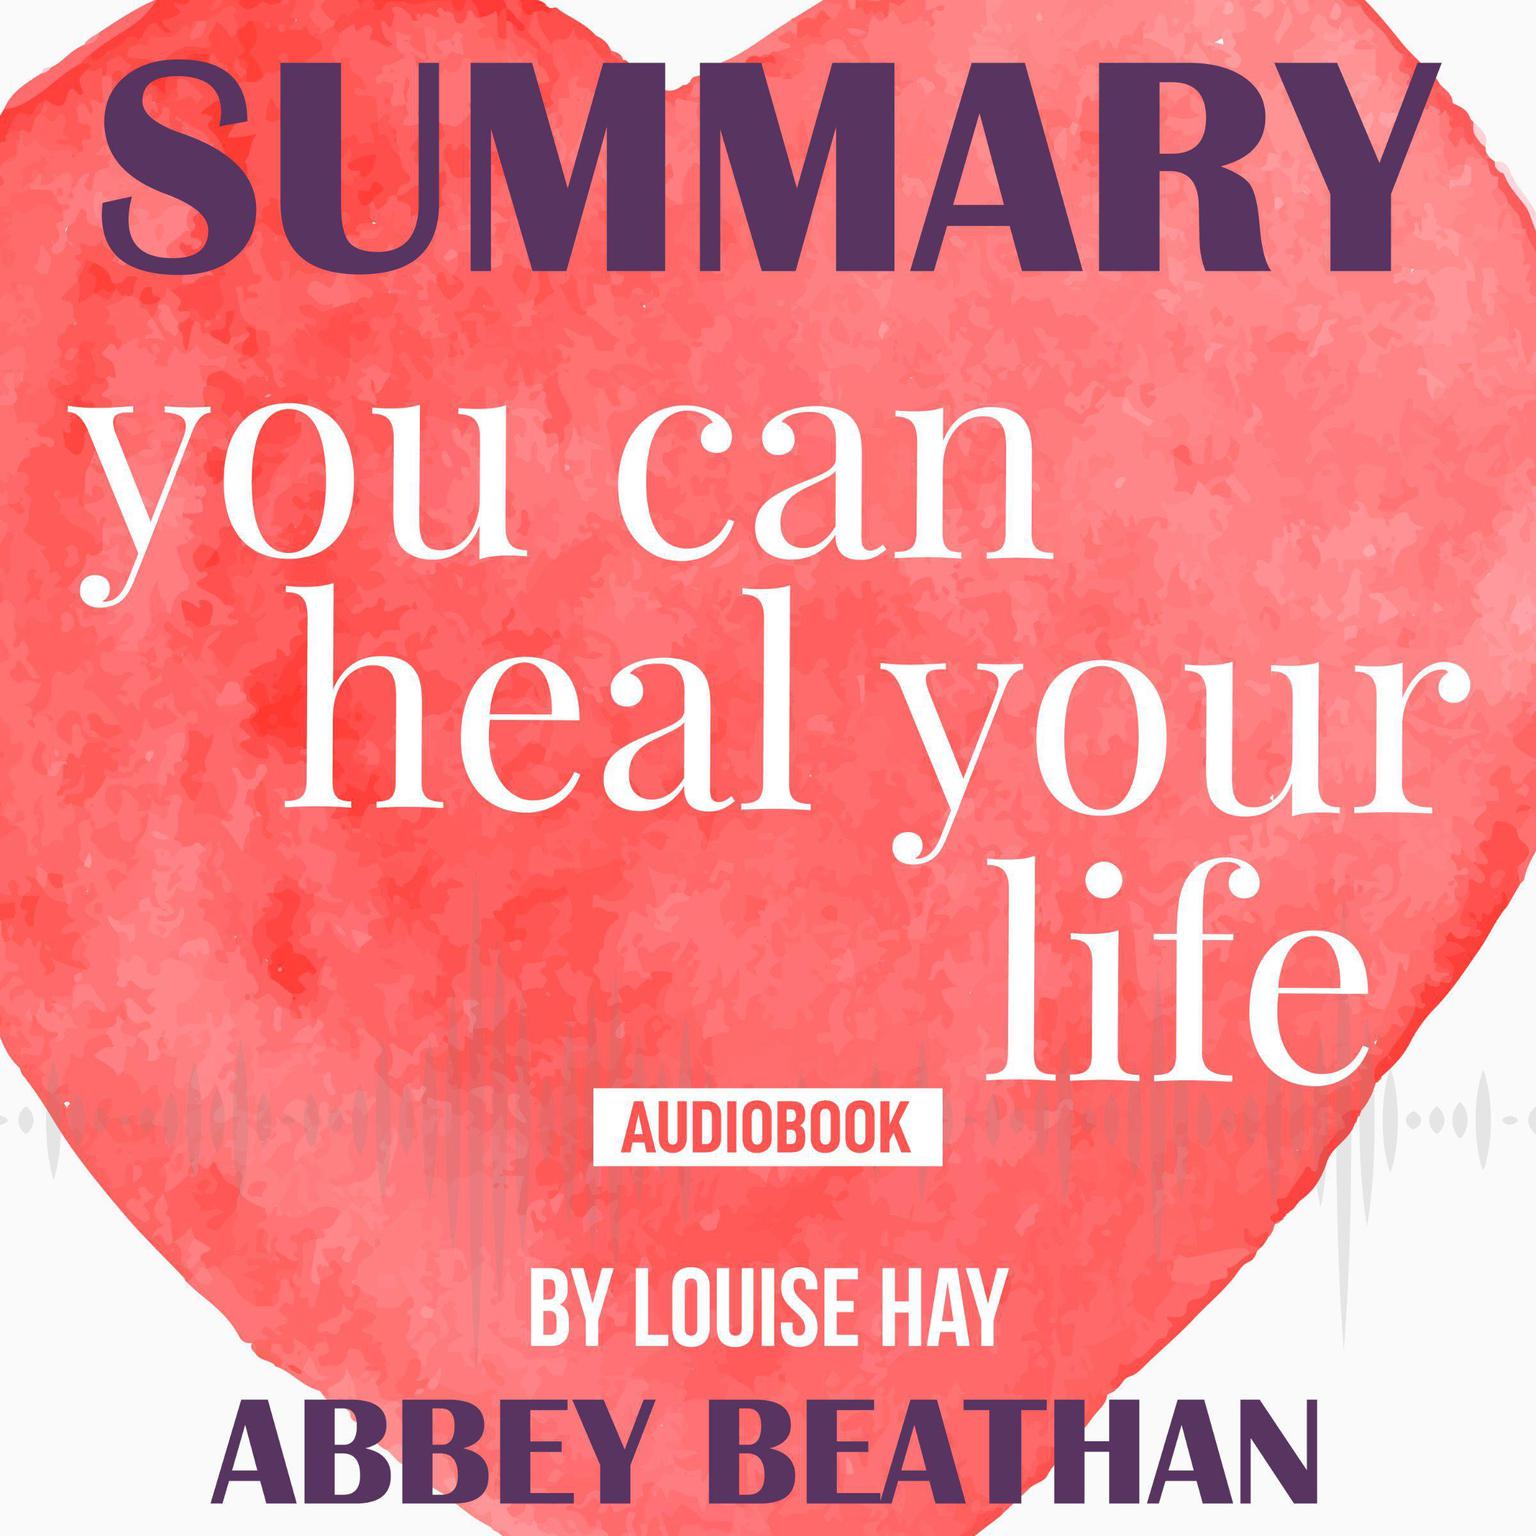 Summary of You Can Heal Your Life by Louise Hay Audiobook, by Abbey Beathan